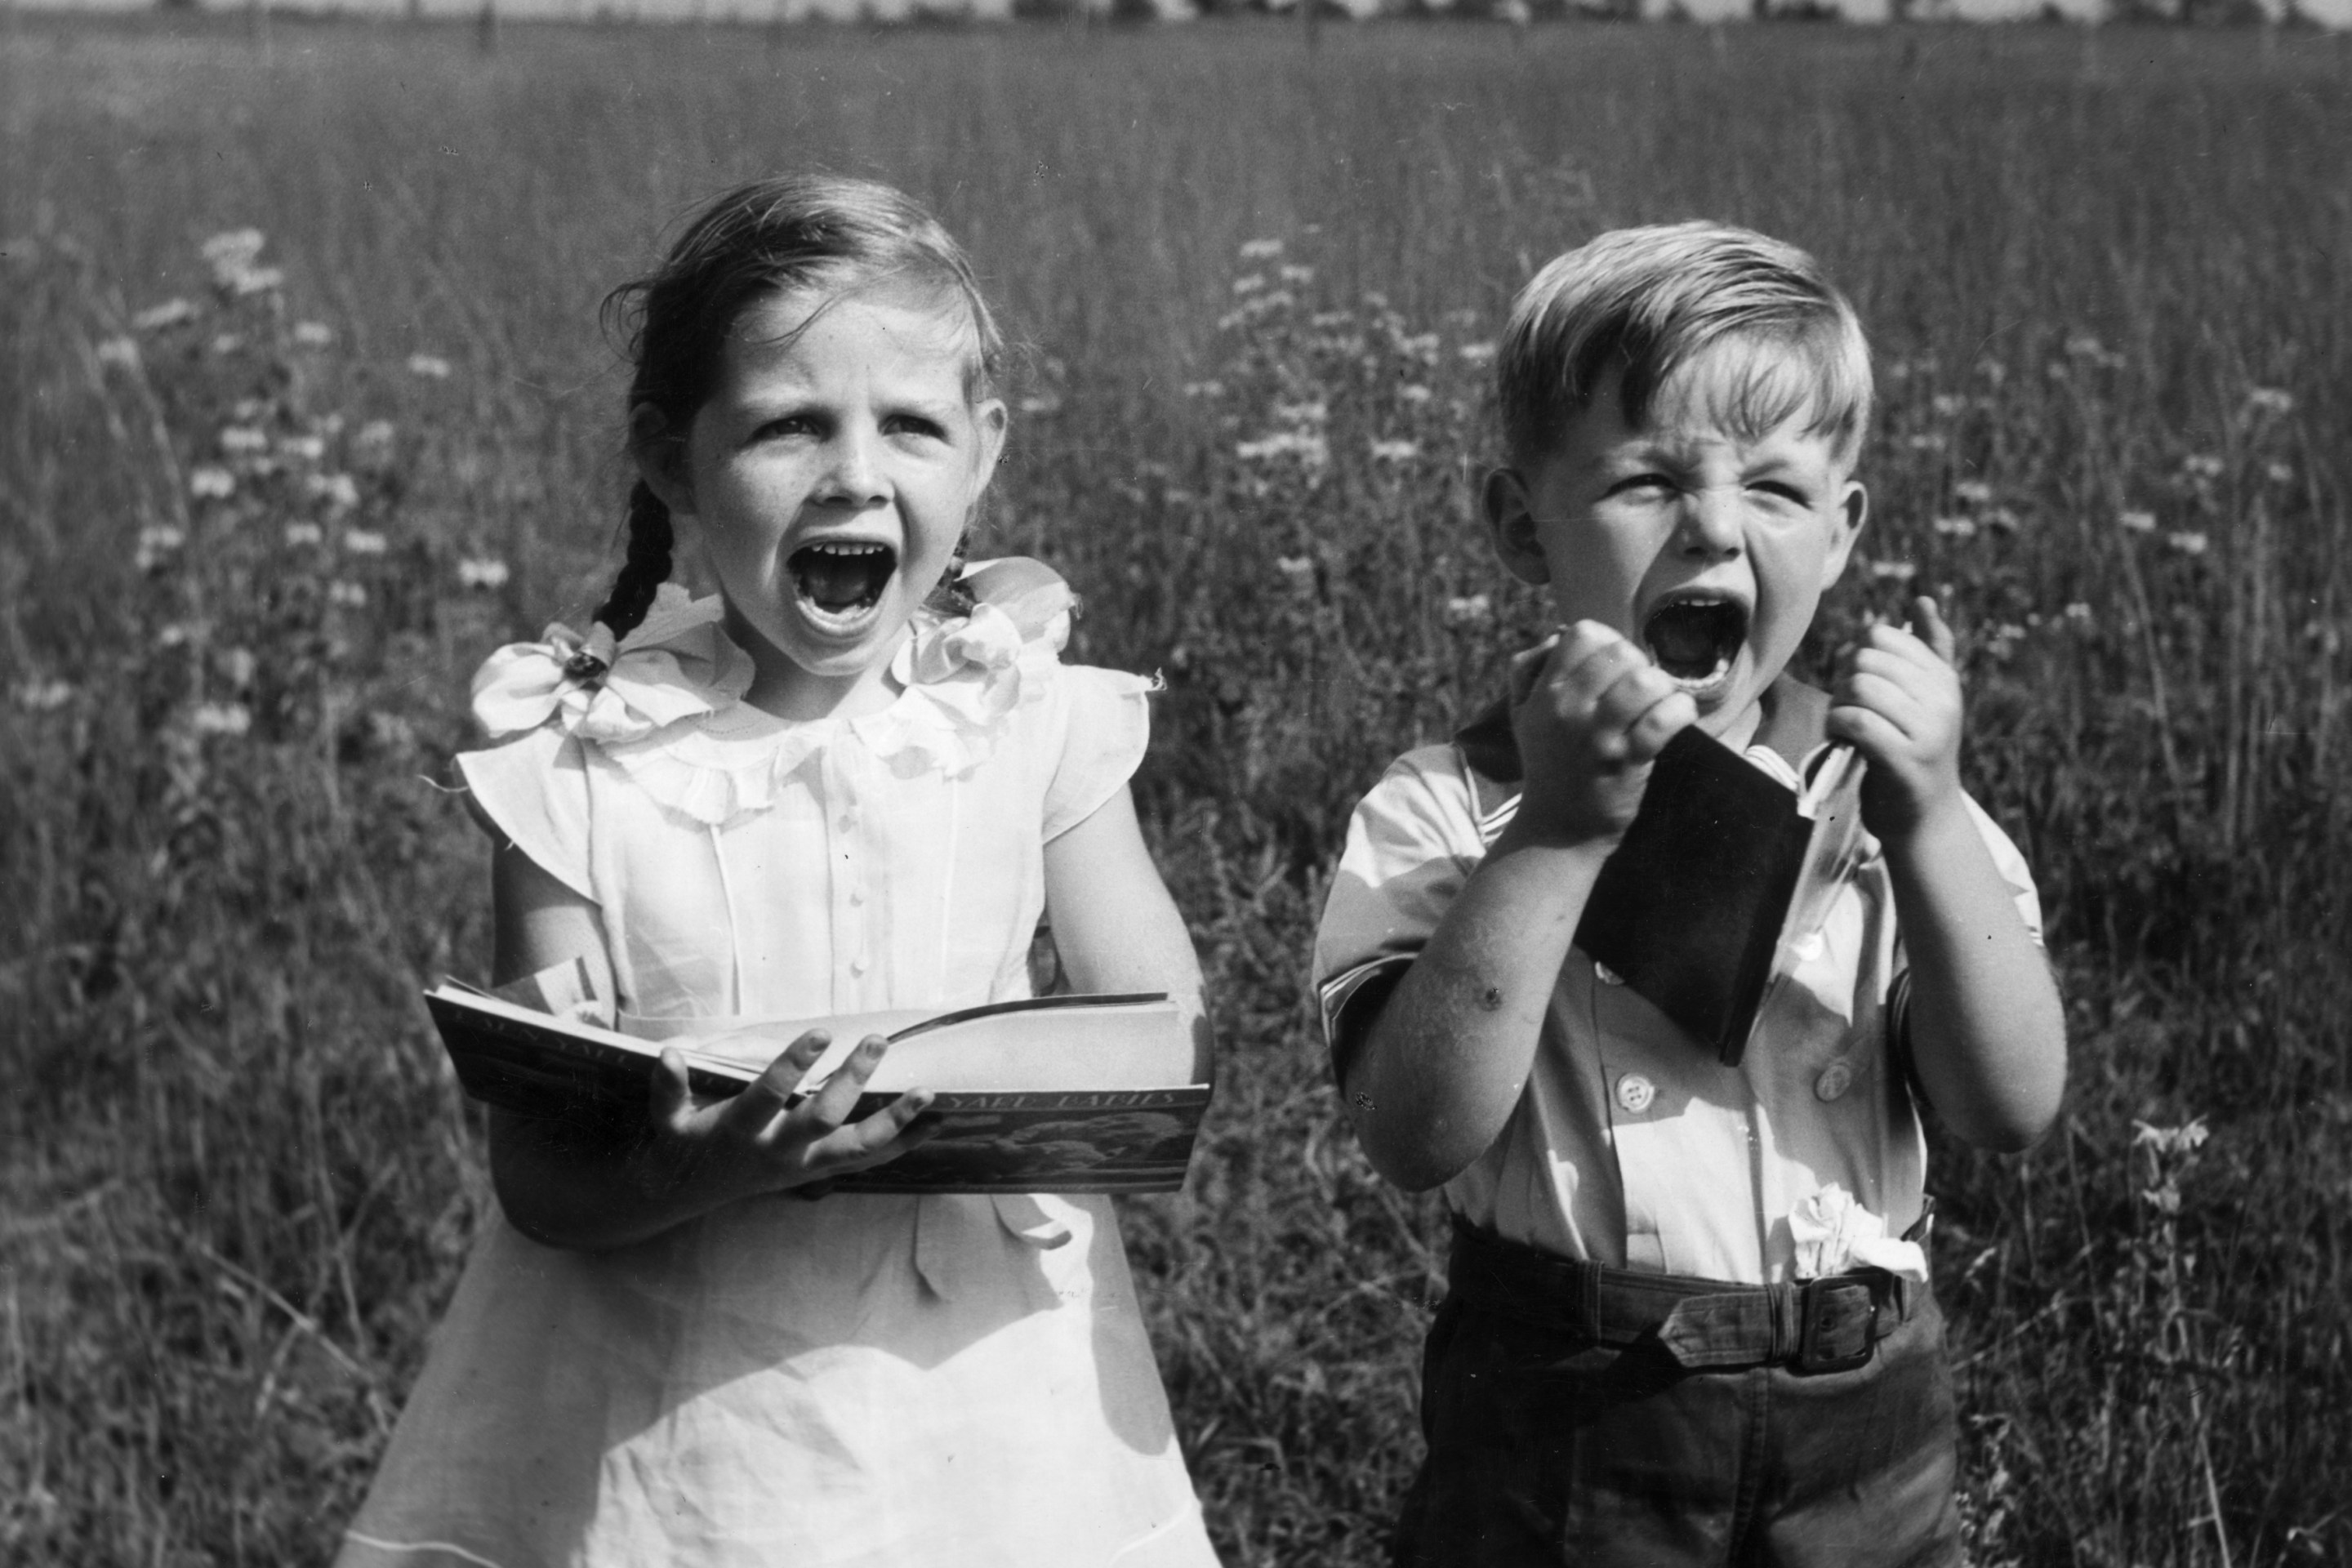 A young boy and girl stand in a farm field holding storybooks and screaming.